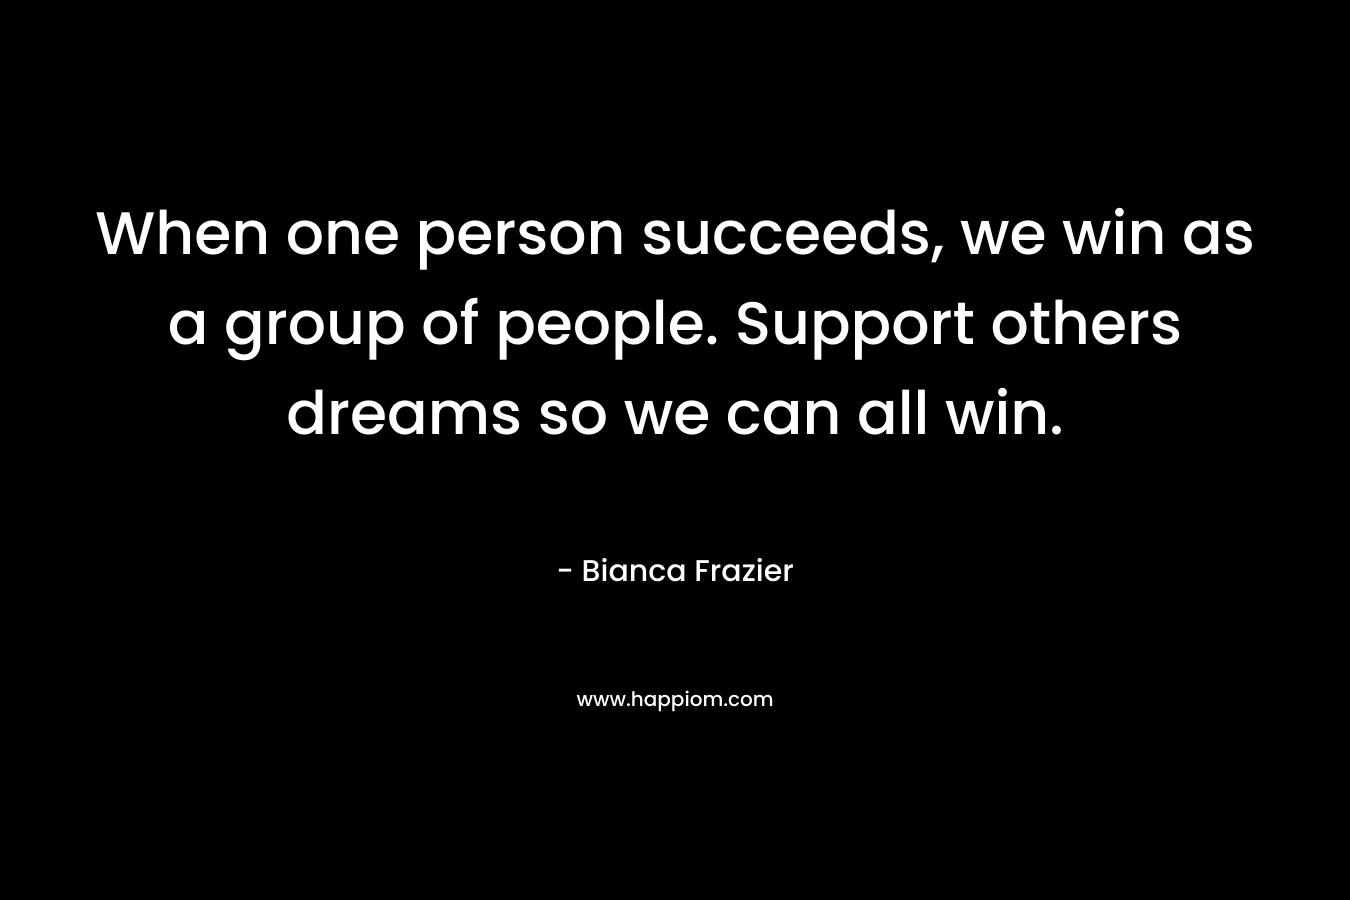 When one person succeeds, we win as a group of people. Support others dreams so we can all win.